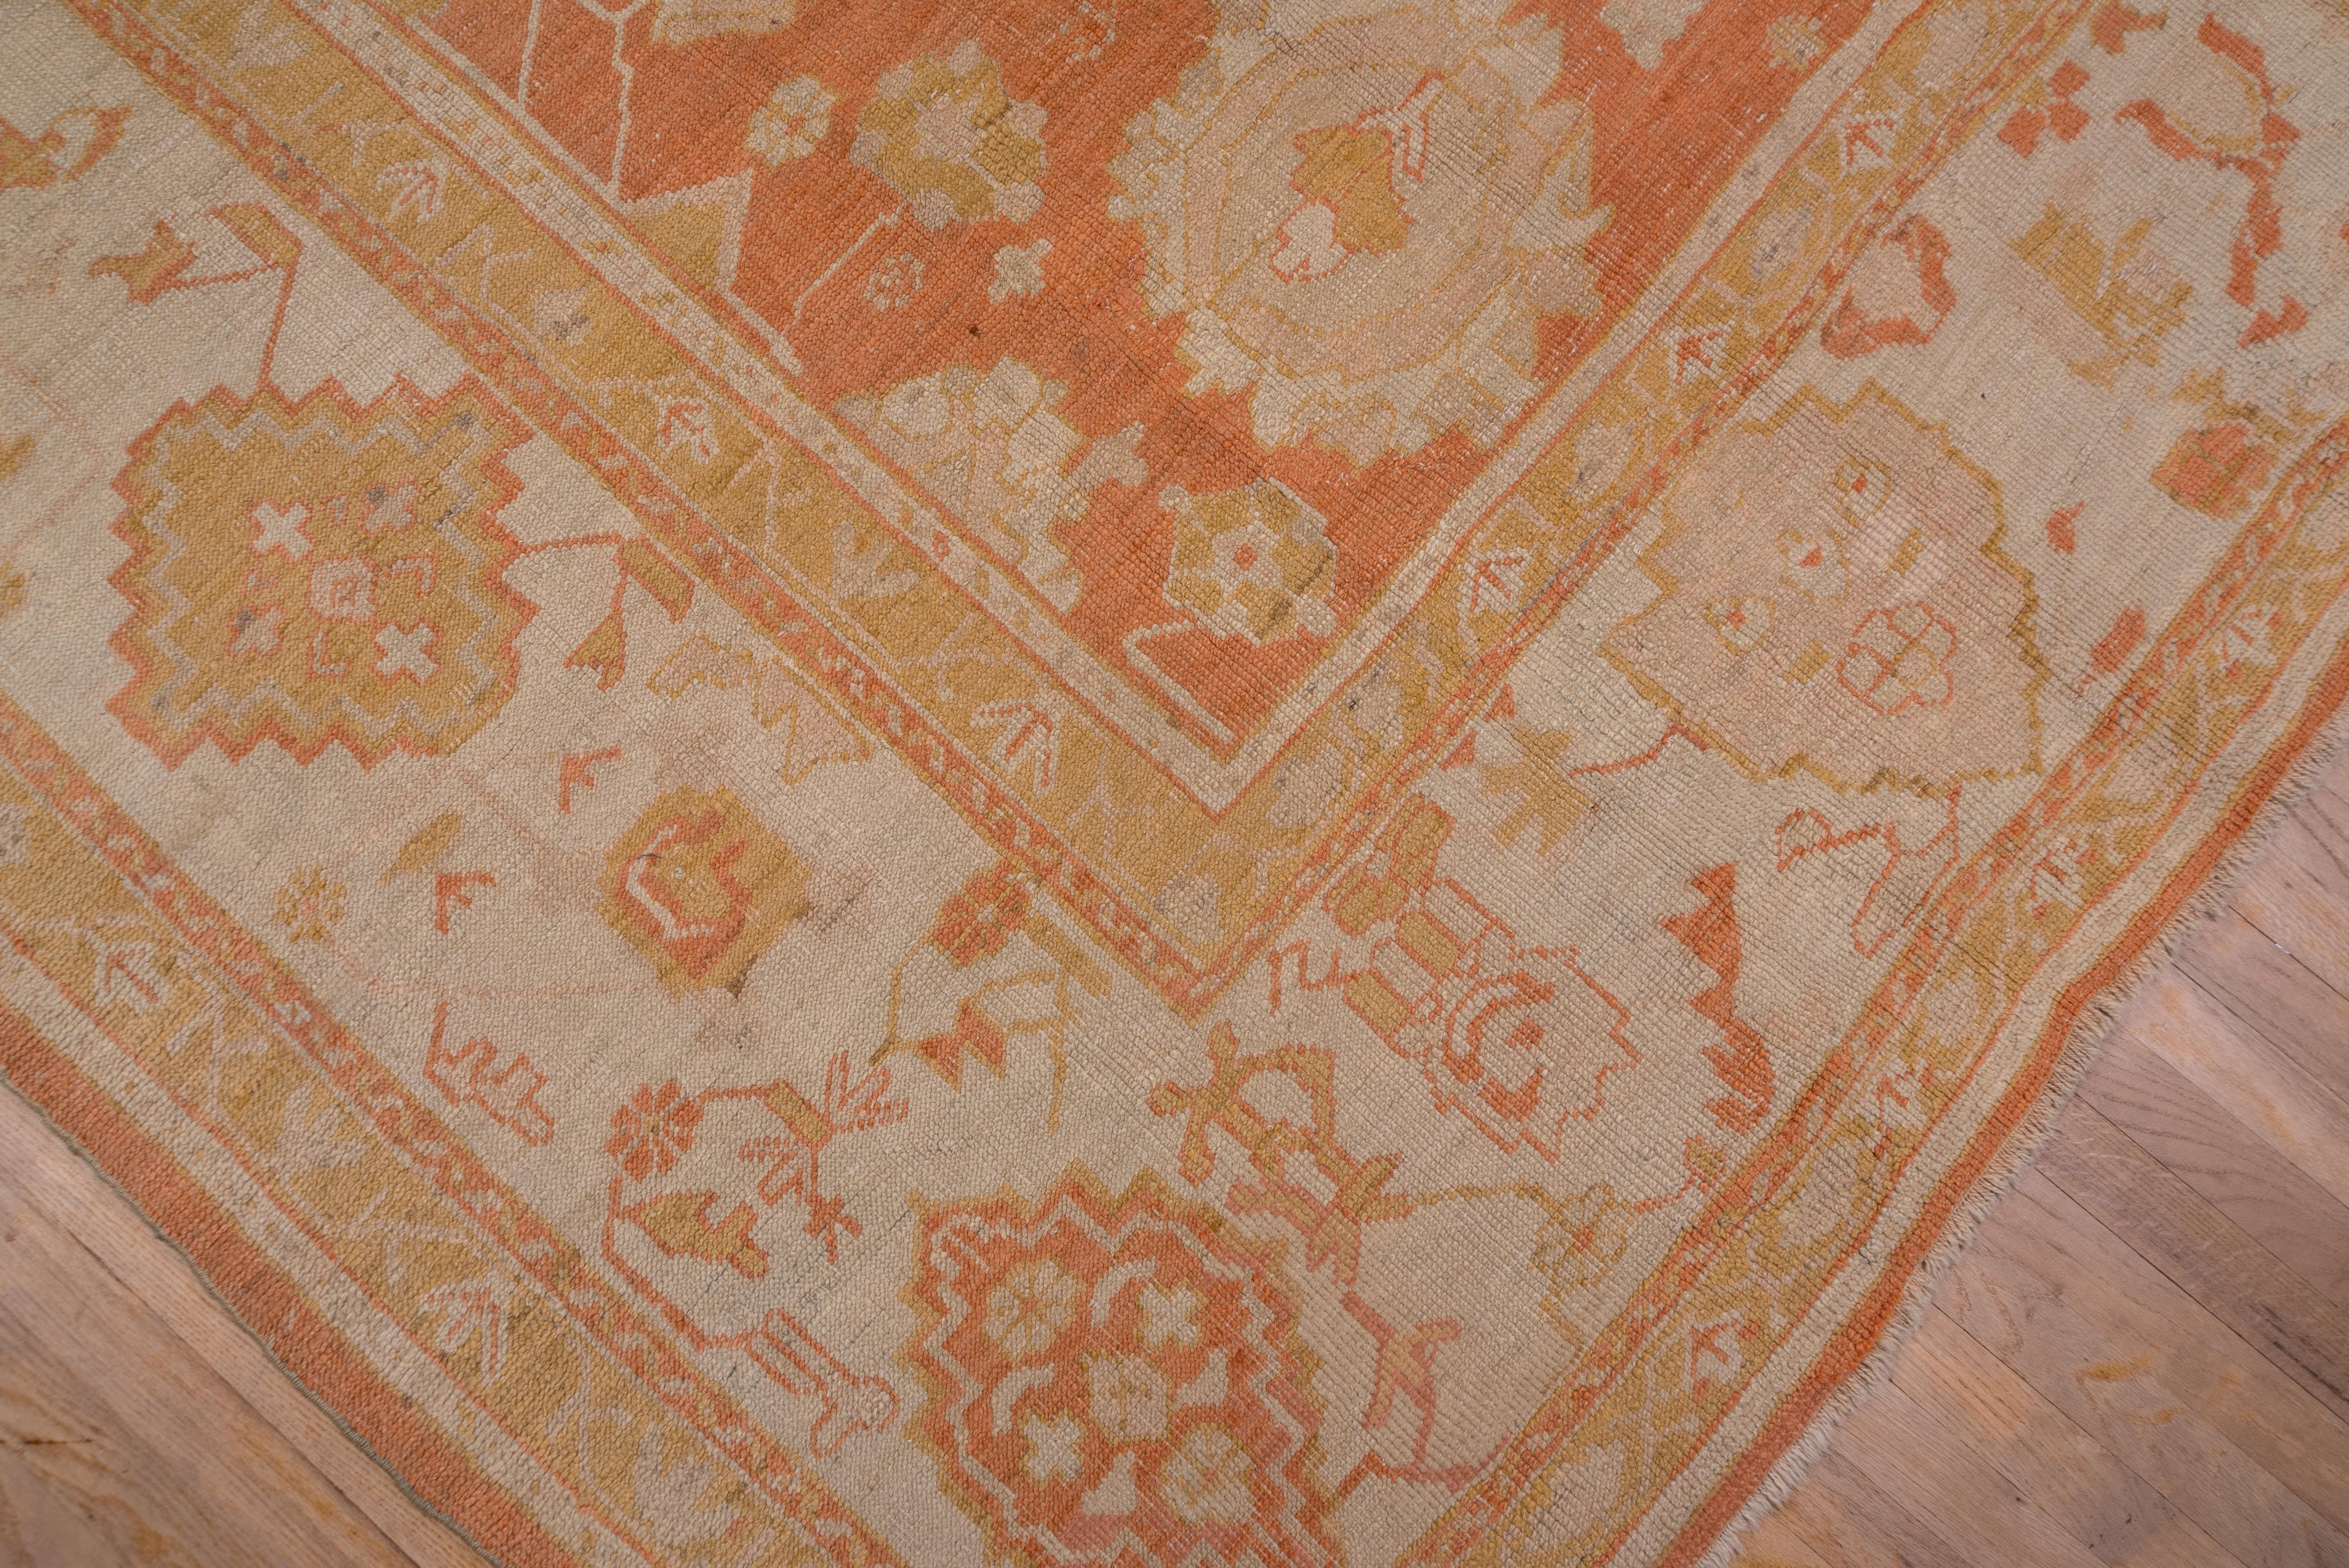 Wool Antique Turkish Oushak Rug, Orange All-Over Field, Ivory Borders, circa 1900s For Sale